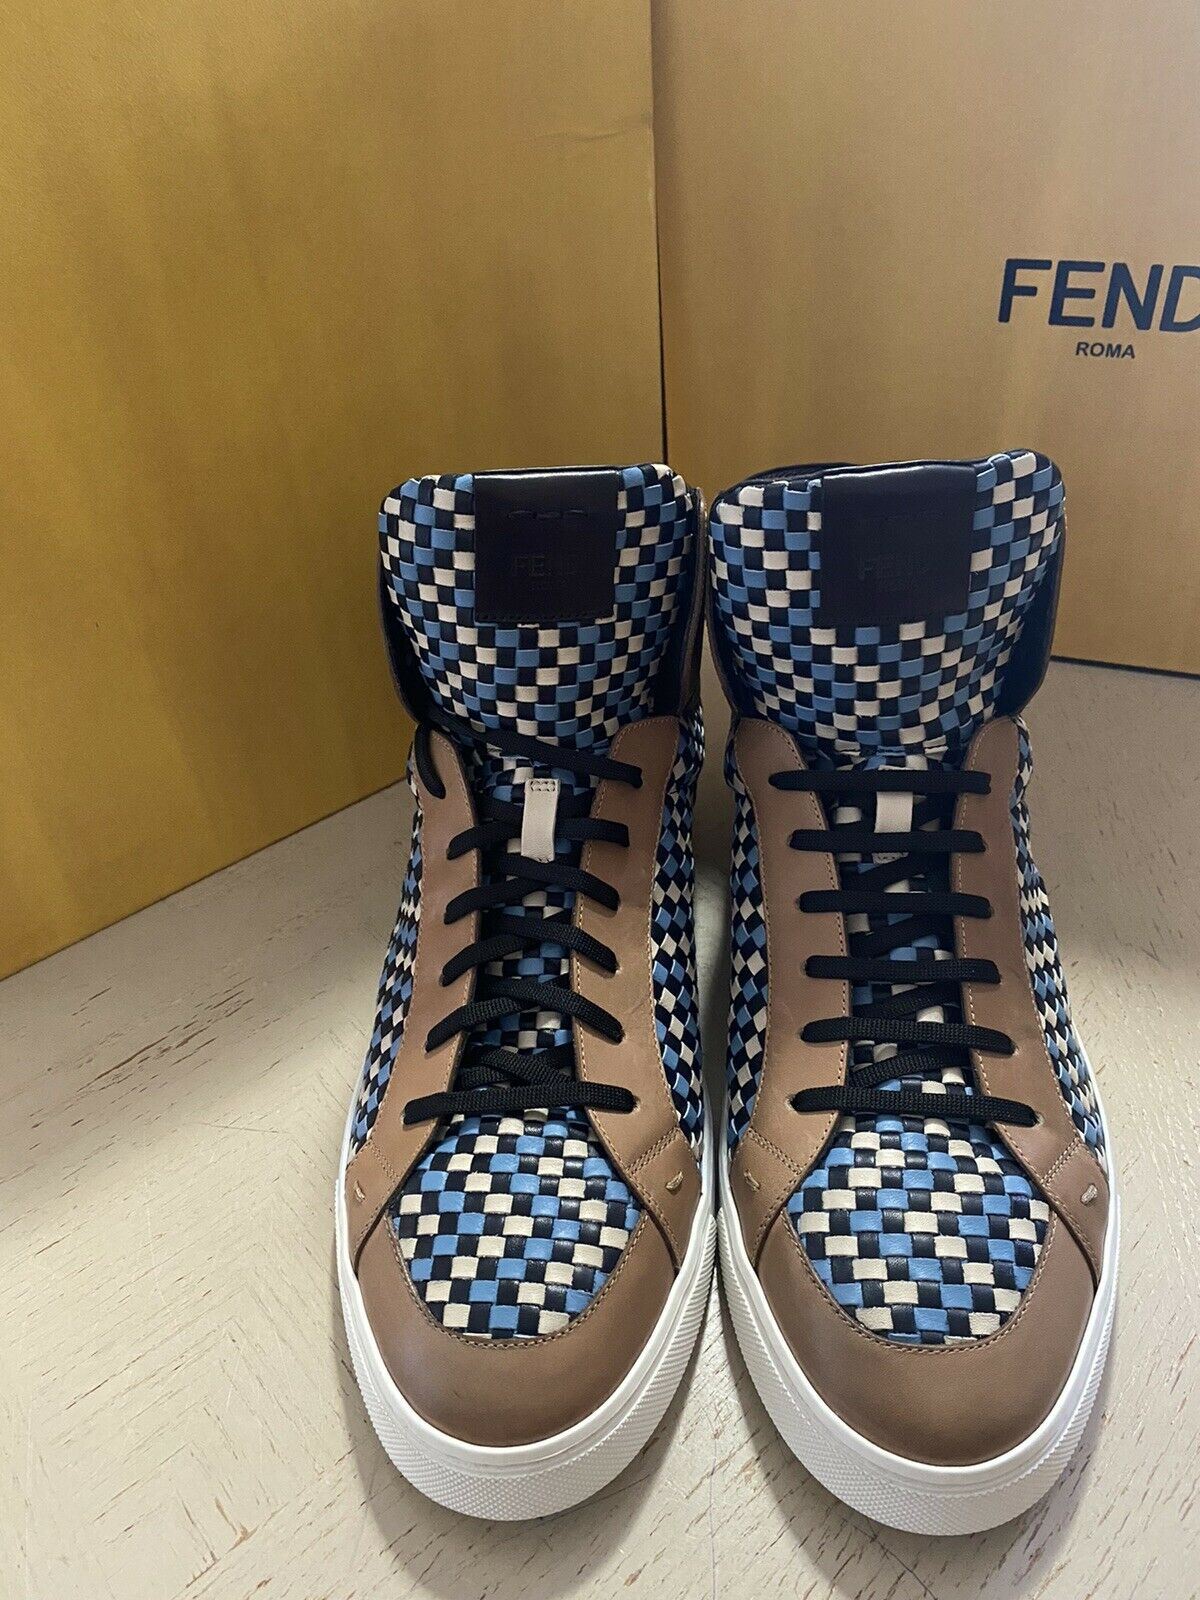 New $1000 Fendi Men Woven Leather High-Top Sneakers Shoes Multicolor 12 US/11 UK